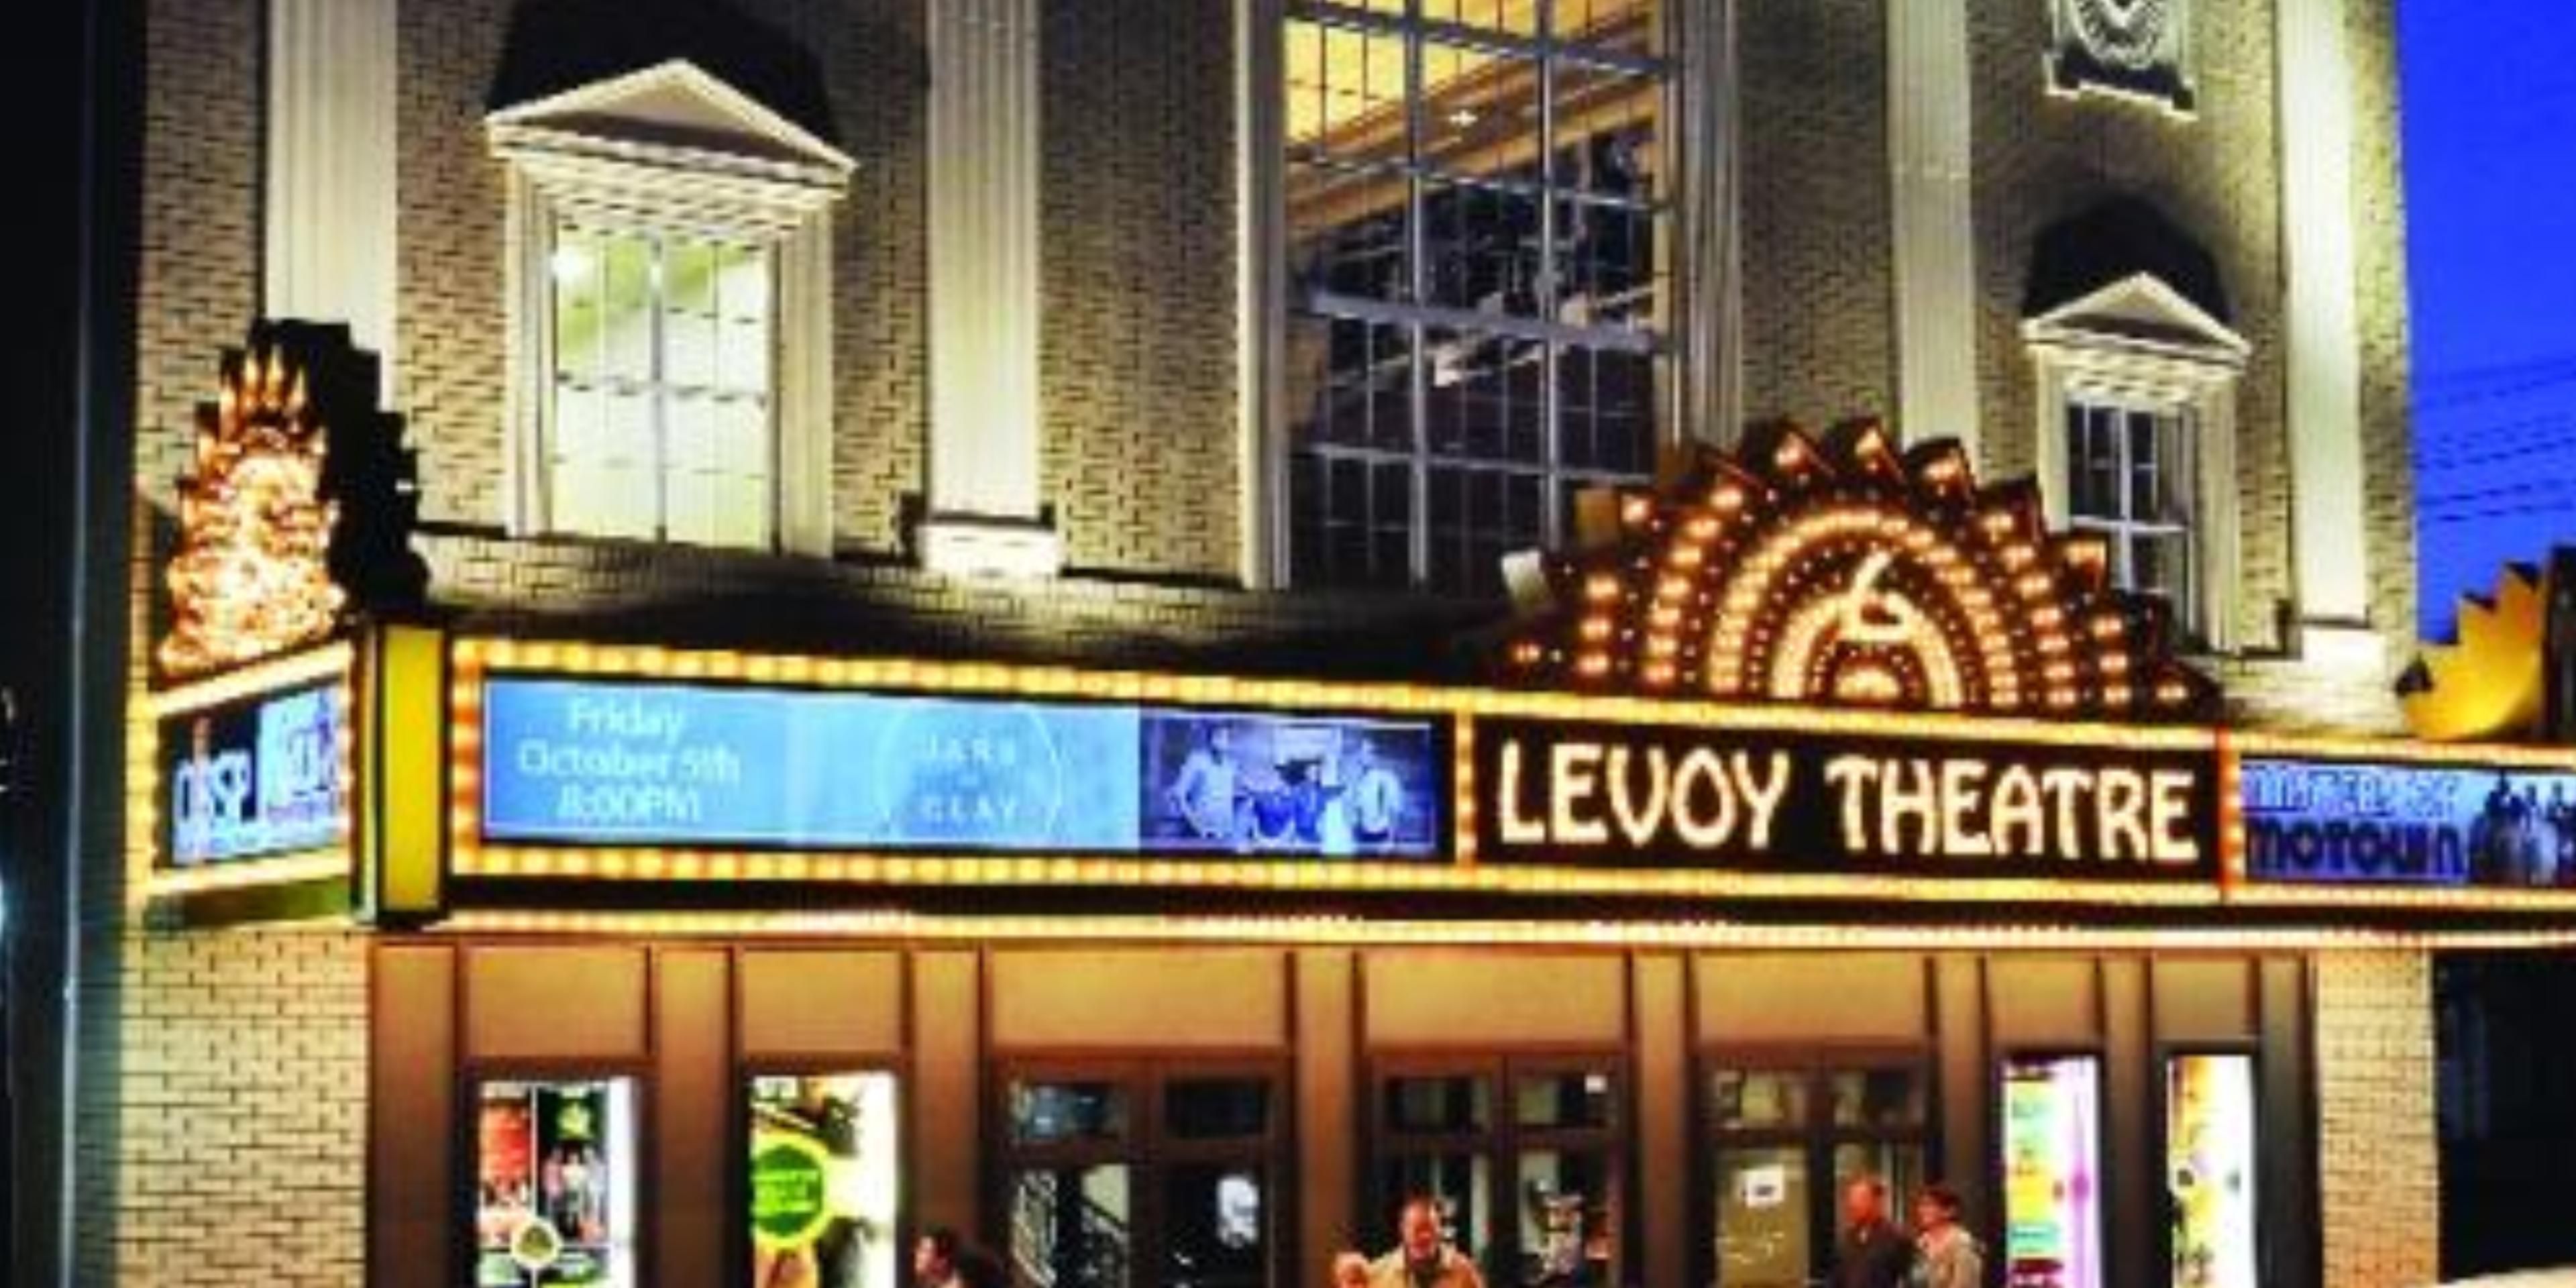 The historic Levoy Theatre is a 696 seat performing arts center located in Millville NJ just 2.7 miles from the hotel, featuring a variety of shows throughout the year.